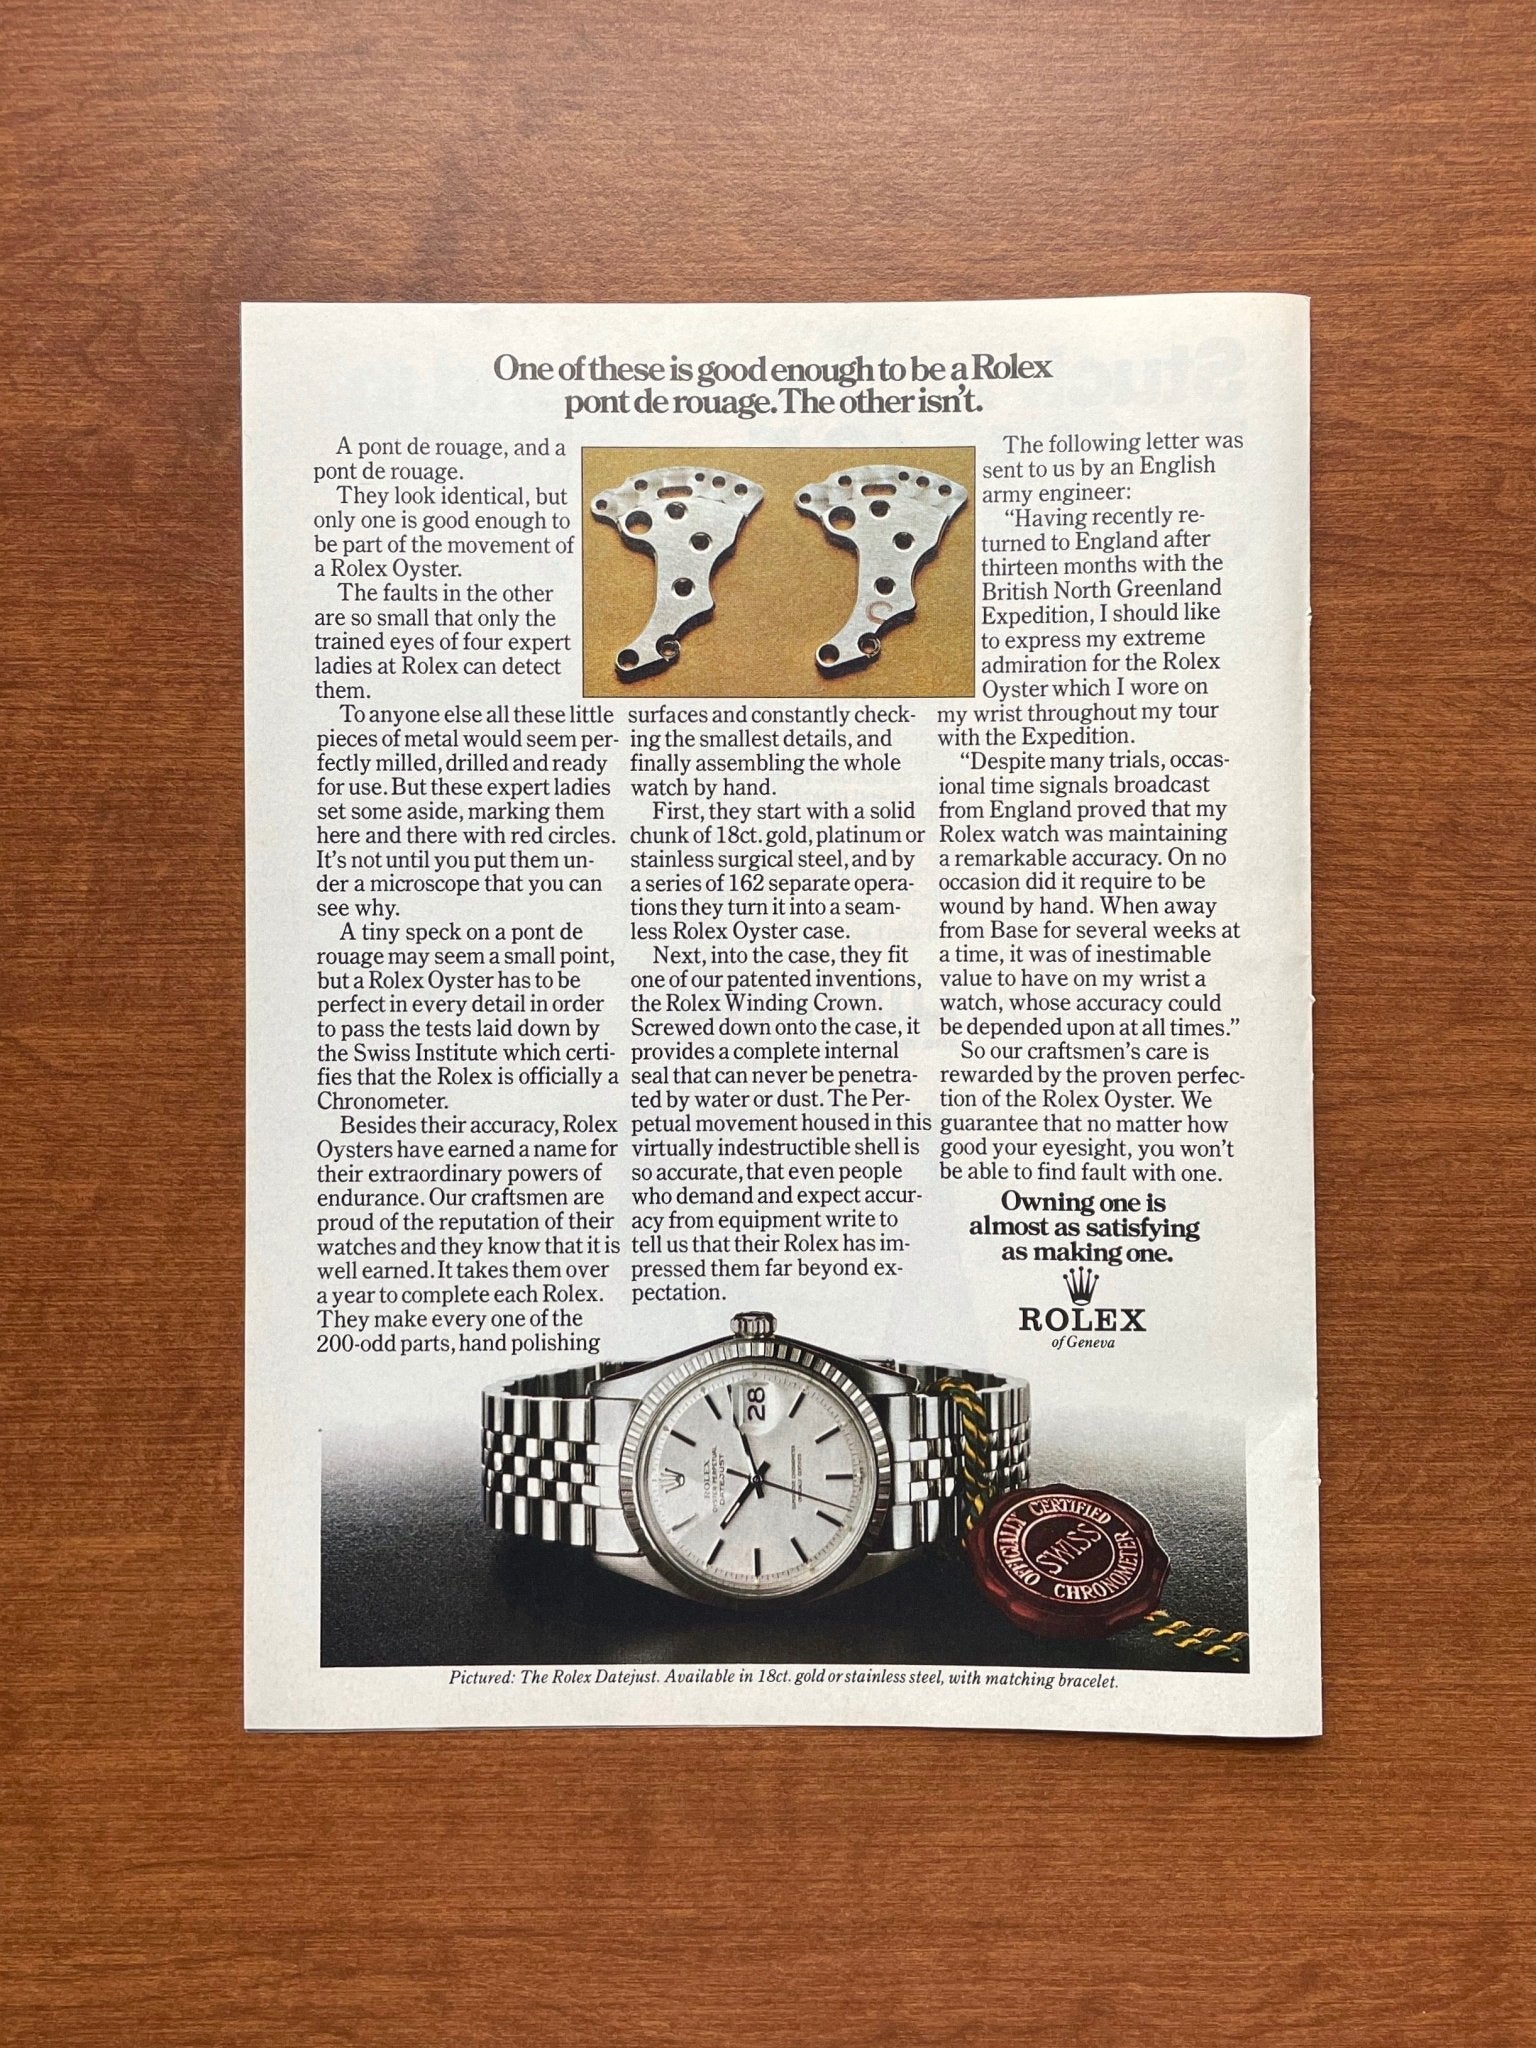 1973 Rolex Datejust Ref. 1603 "The other isn't." Advertisement